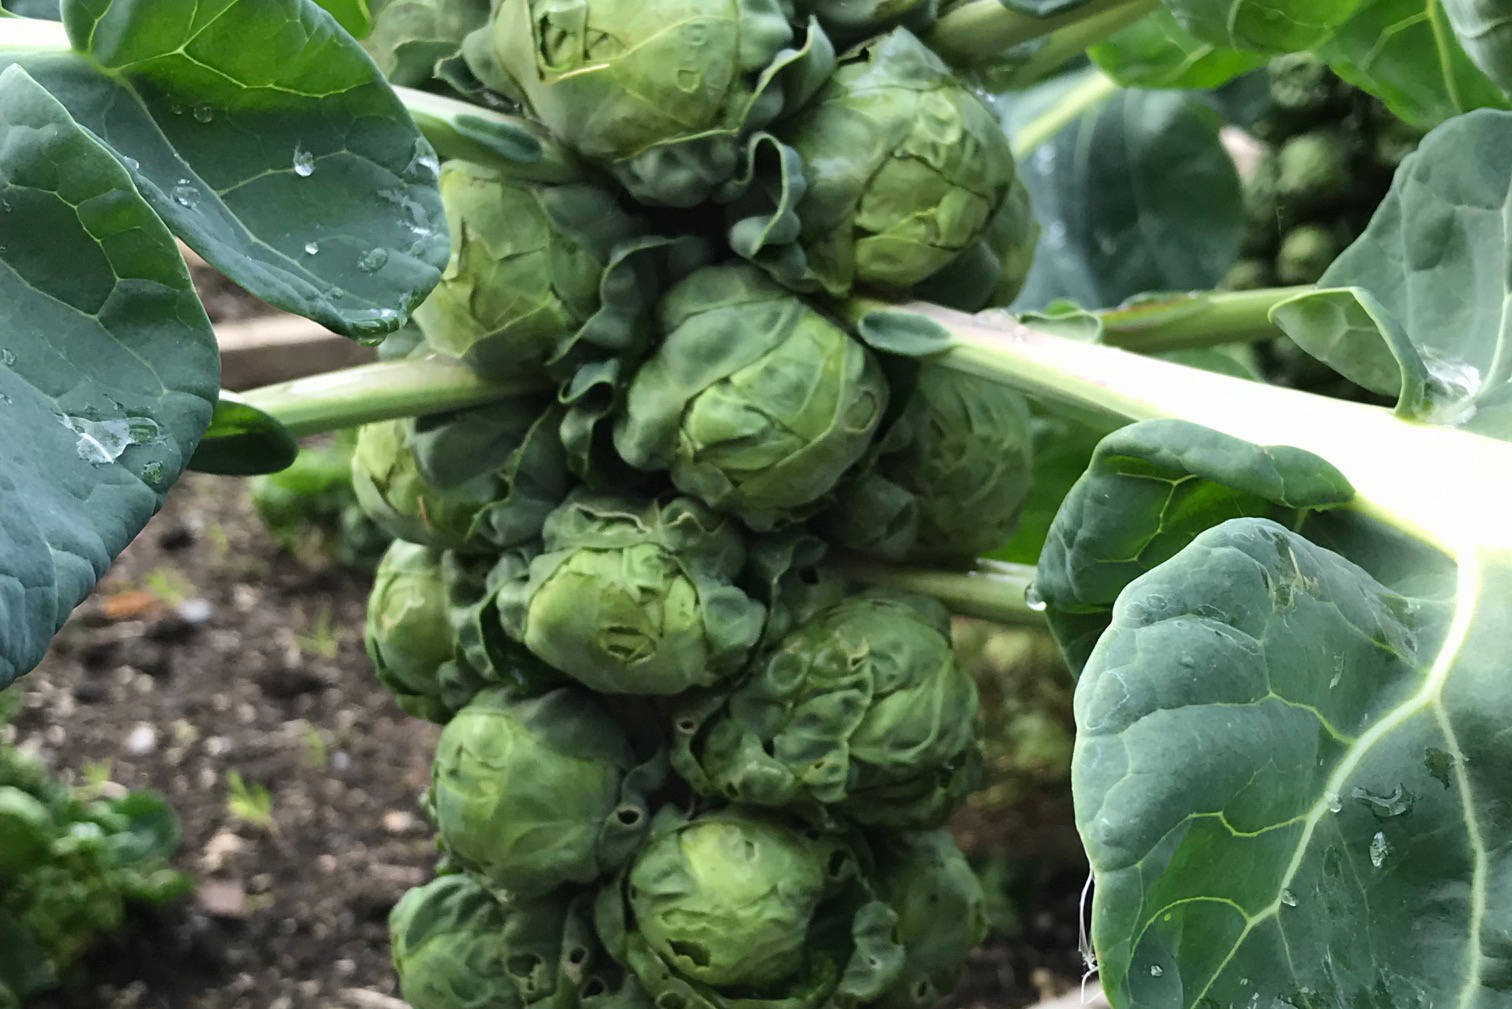 Jade Cross Brussels sprouts at their peak of perfection. (Photo by Rosemary Fitzpatrick)